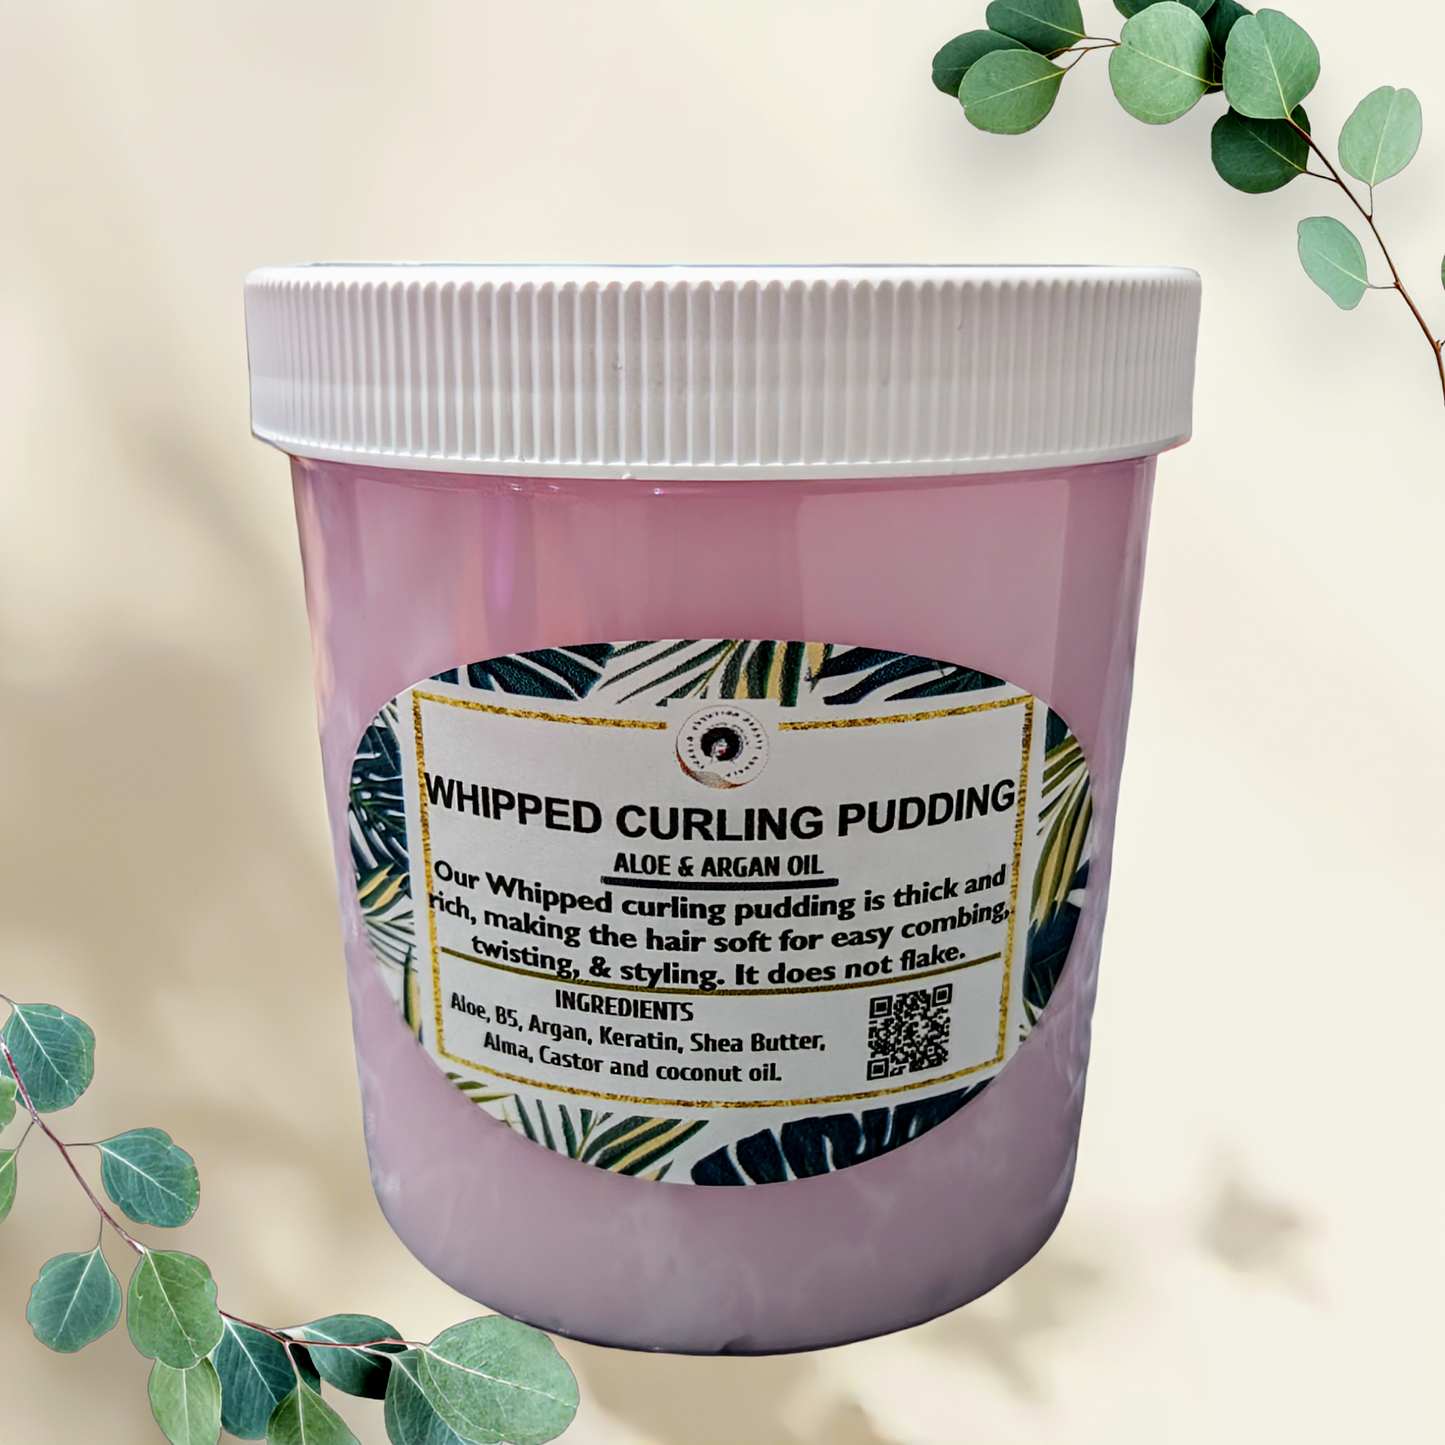 WHIPPED CURLING PUDDING- ALOE & ARGAN OIL 16 oz